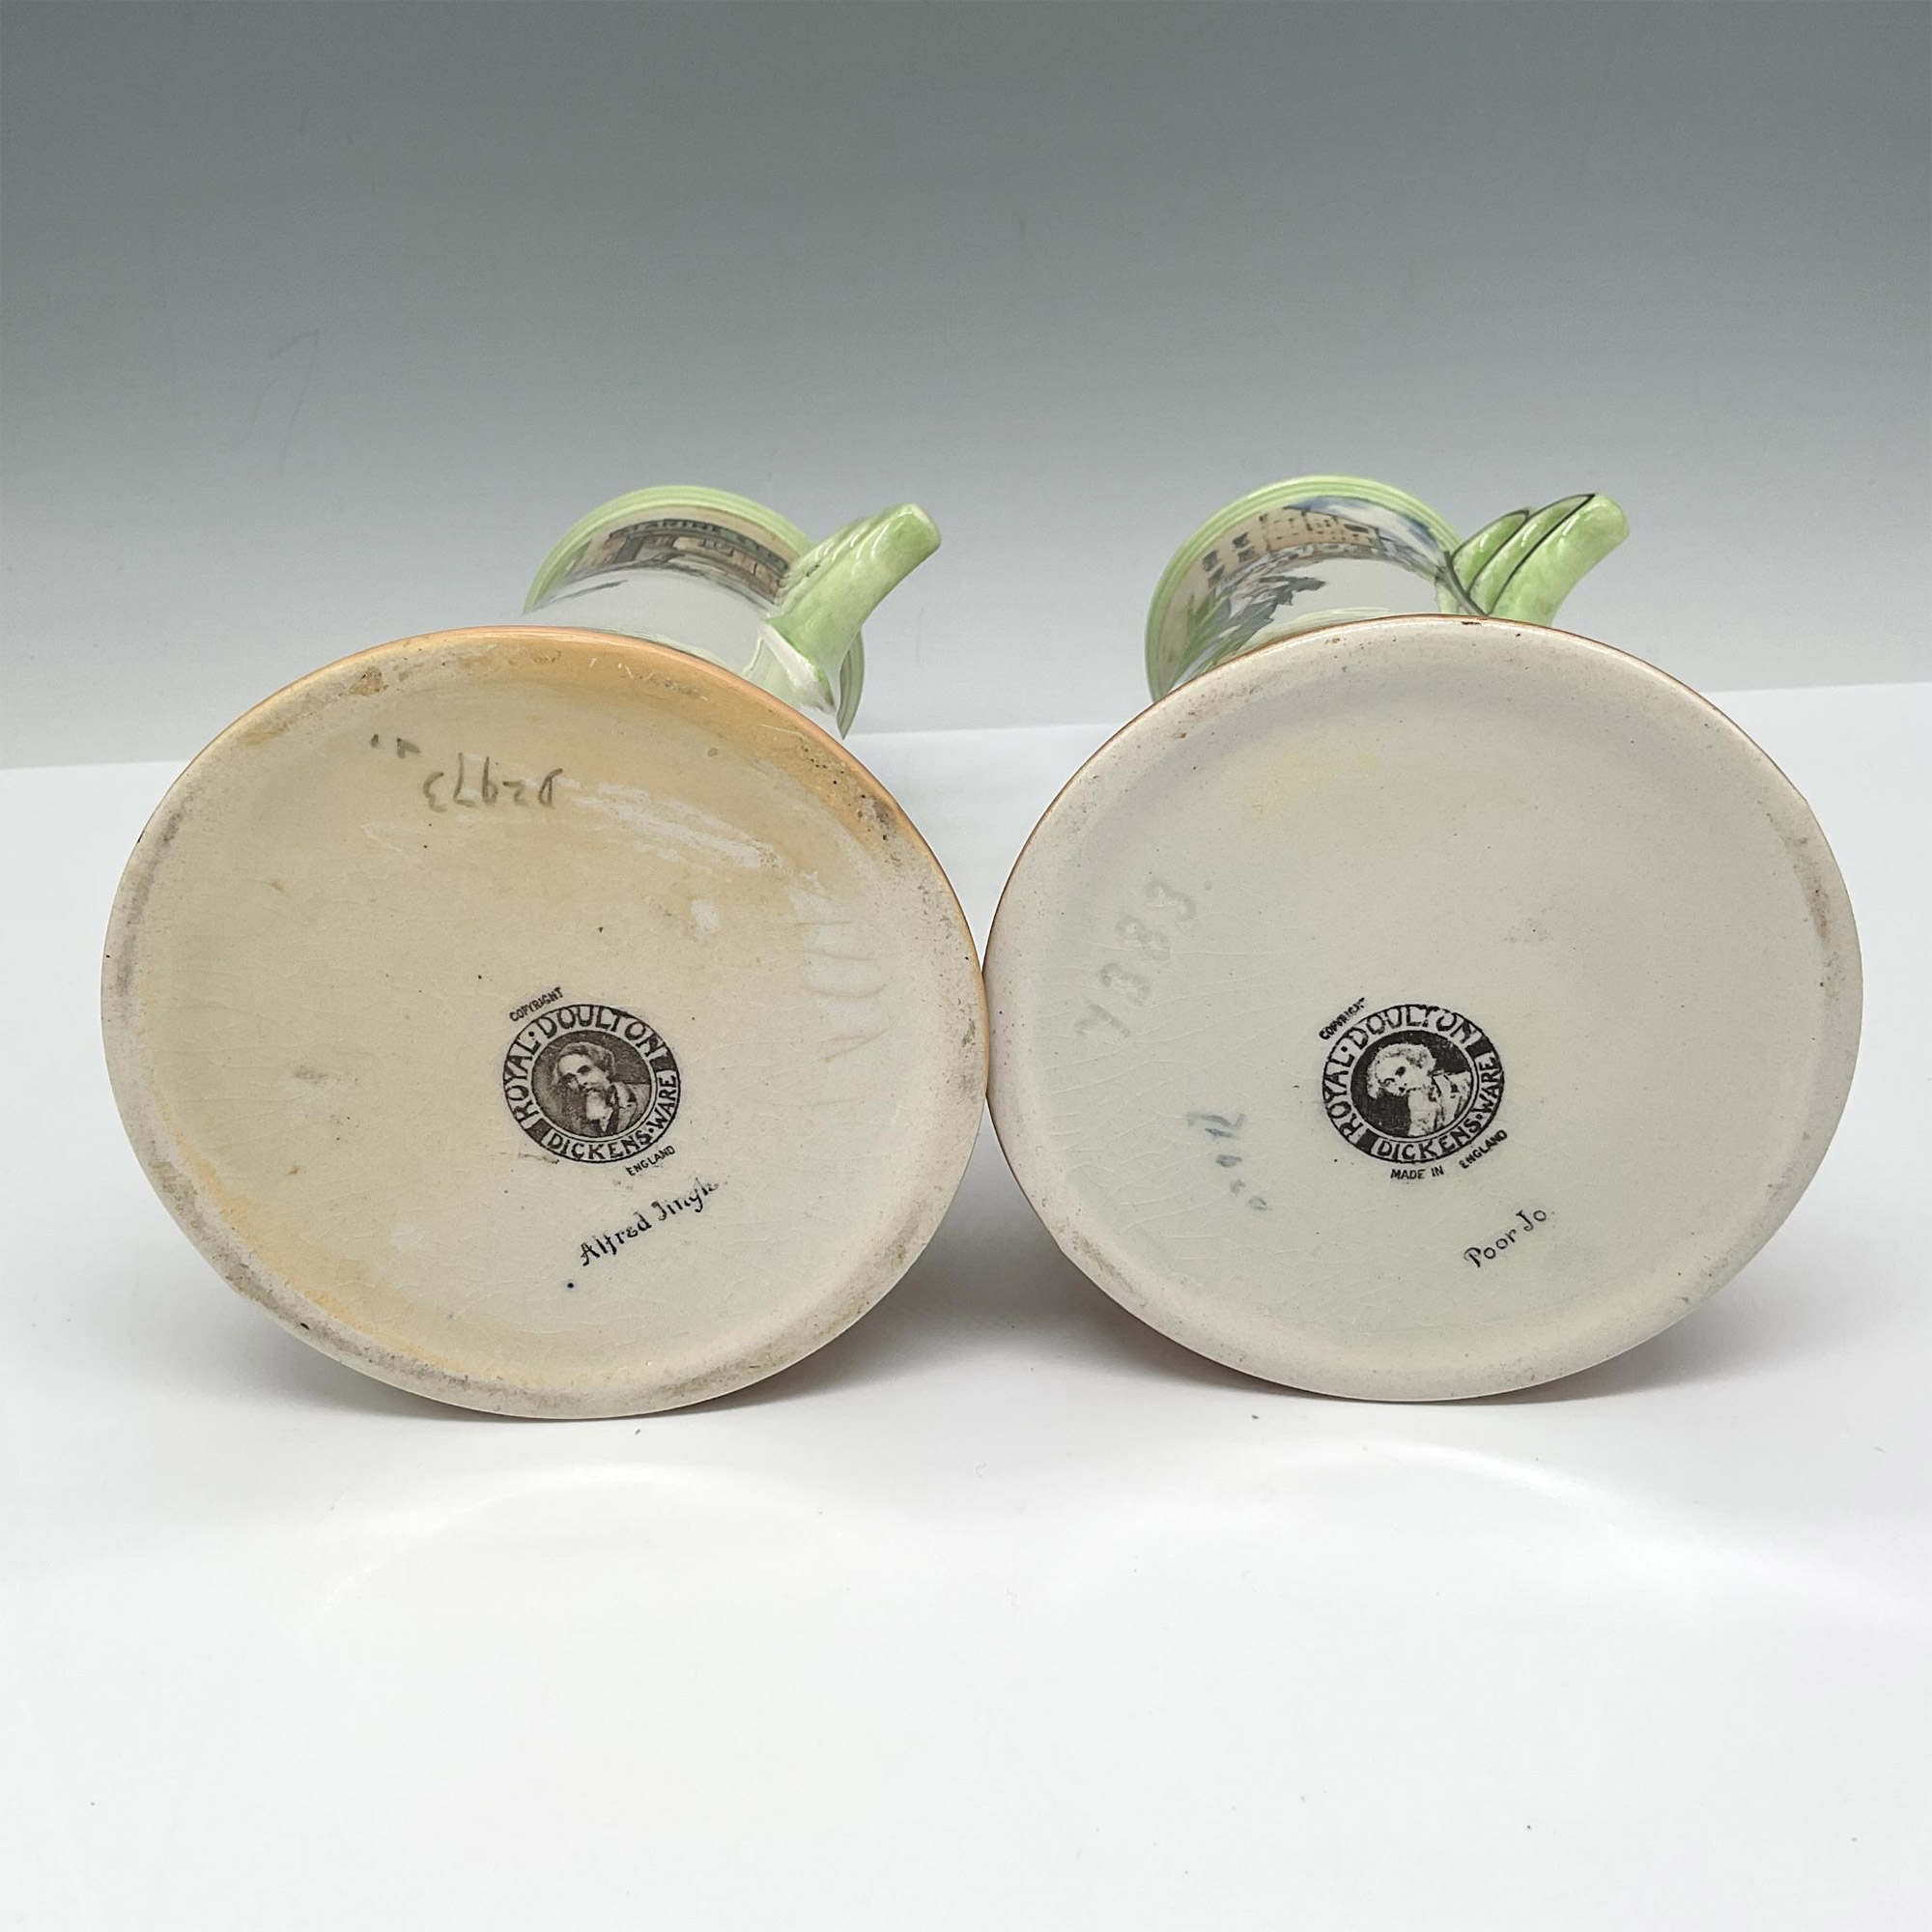 Pair of Royal Doulton Dickens Ware Vases - Image 3 of 3